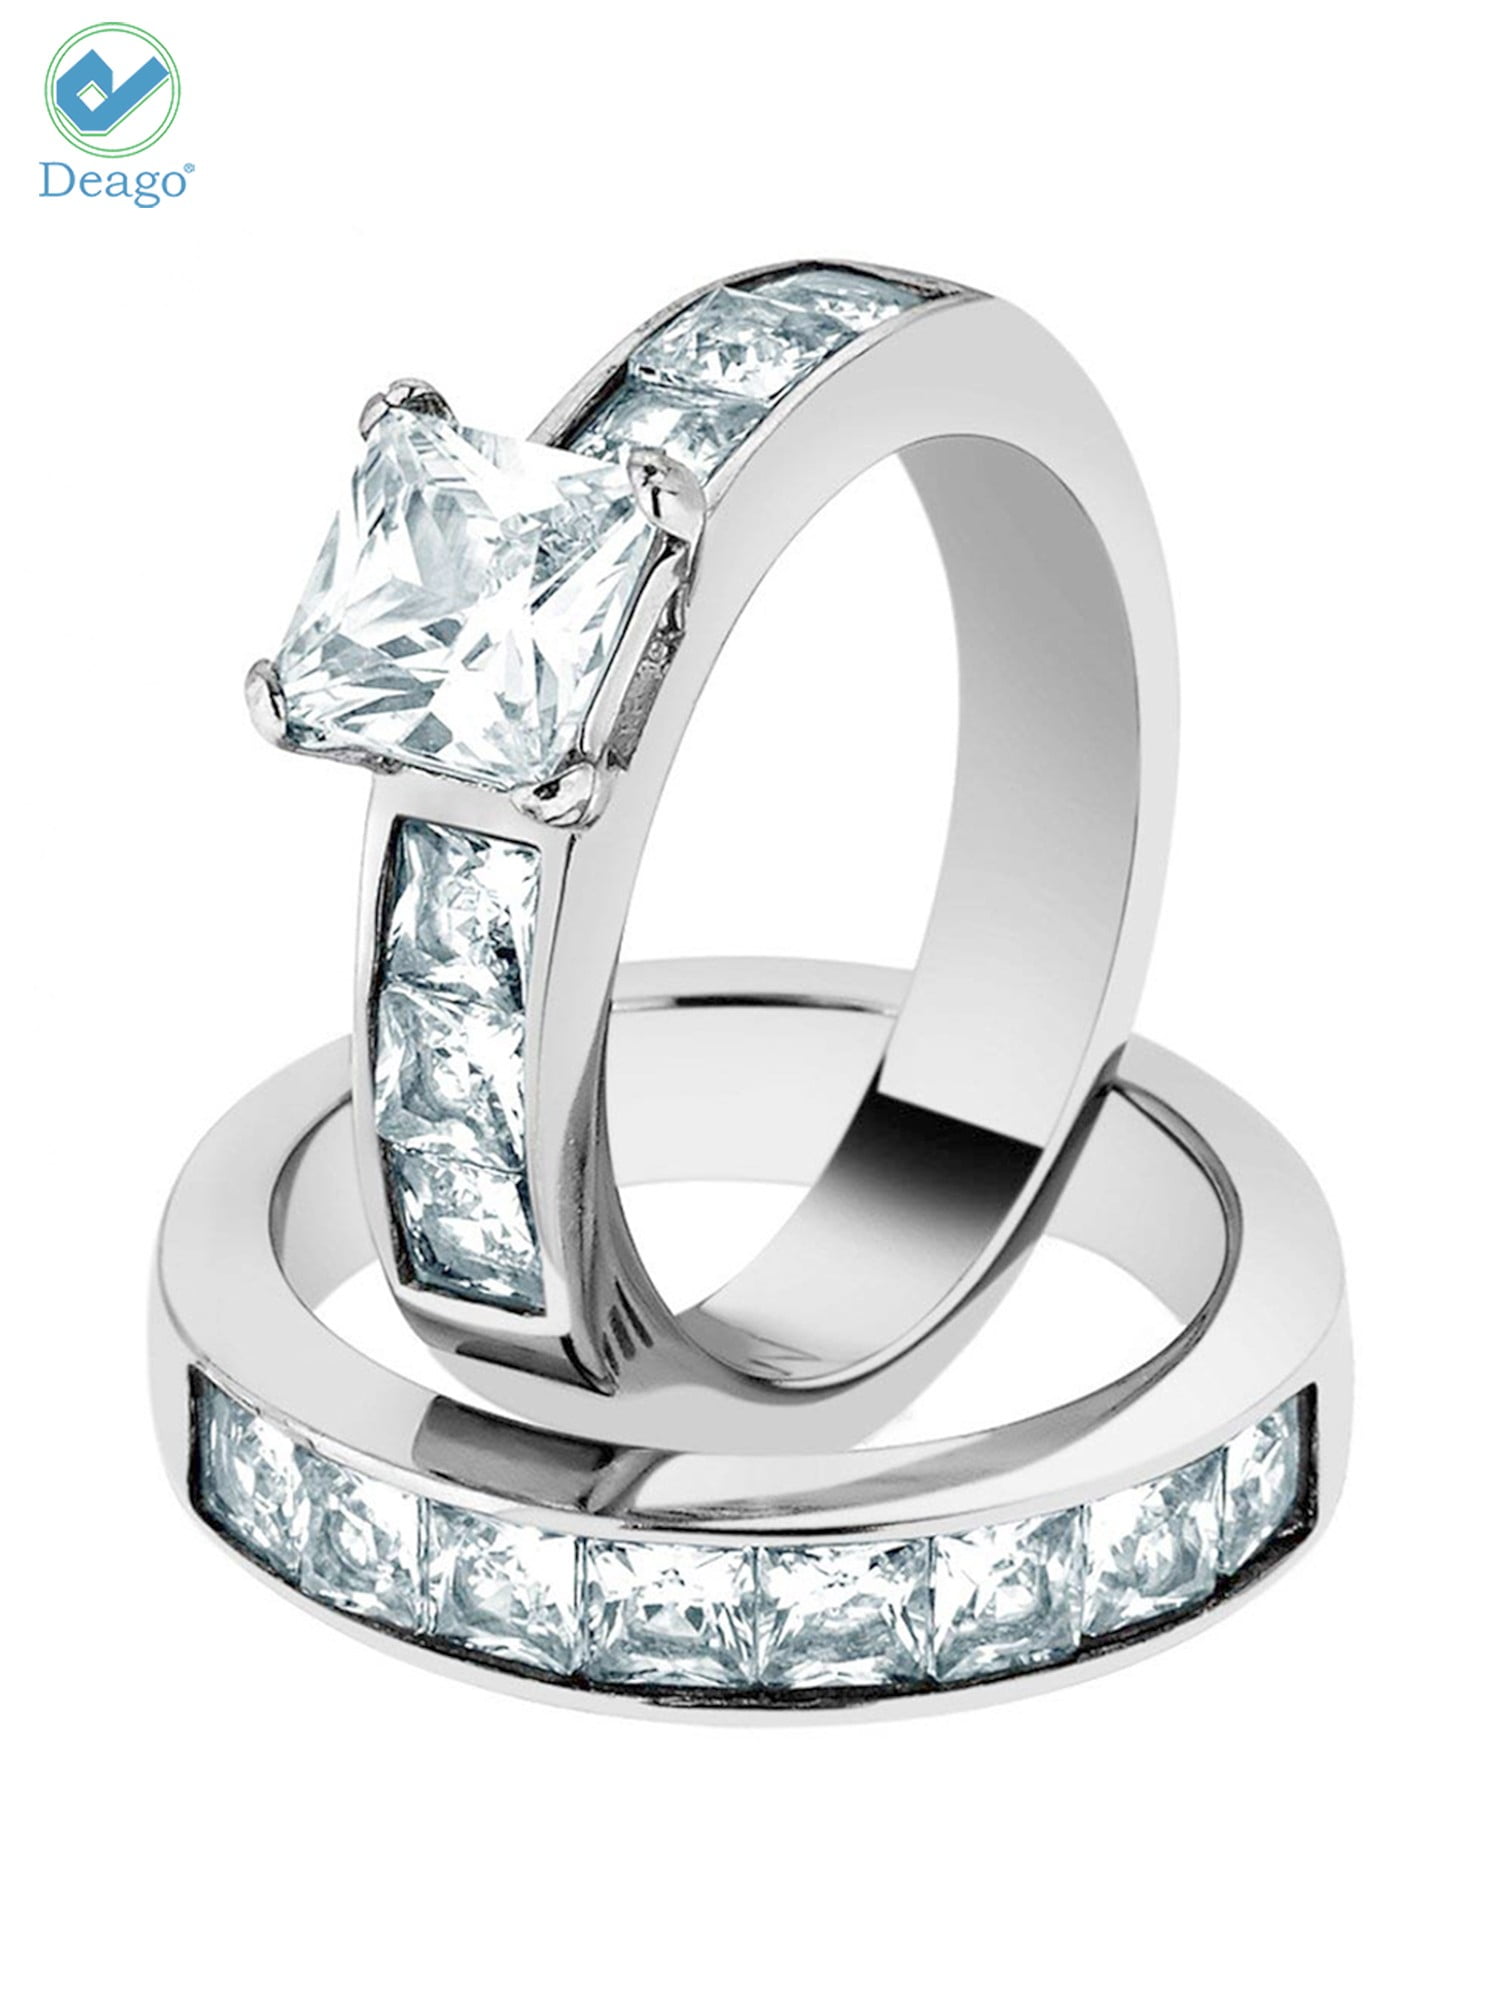 Ladies Women's Genuine Solid 925 Sterling Silver Princess CZ Promise Bridal Ring